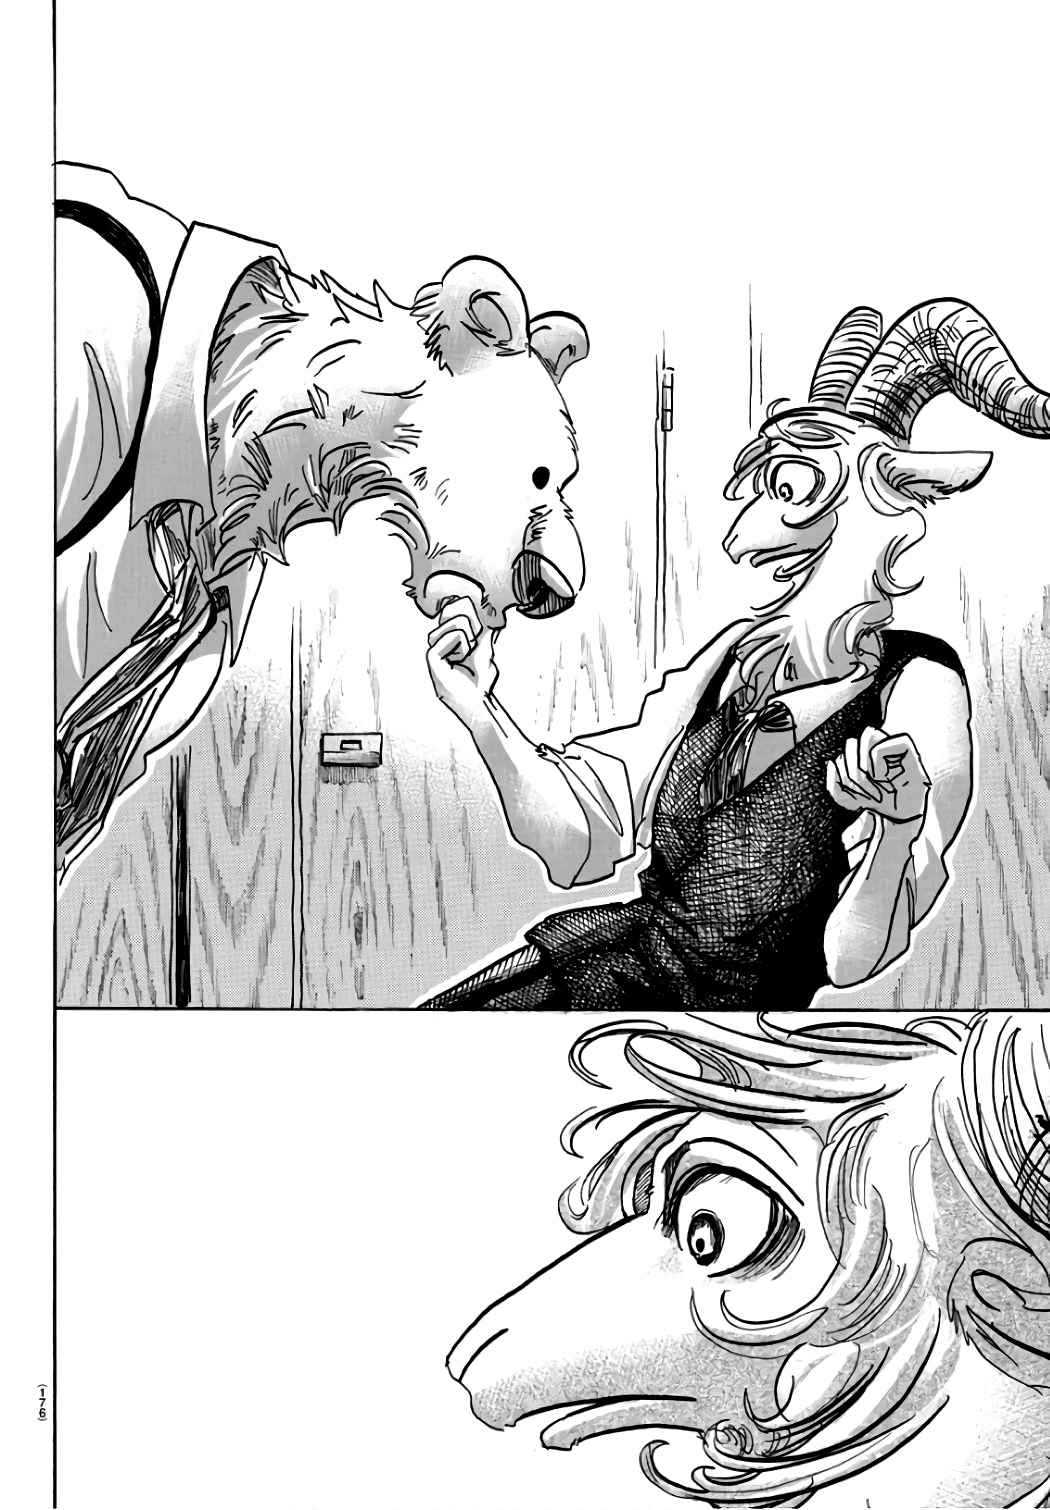 Beastars Ch. 87 The New Star Wins the Award for Best Supporting Actor